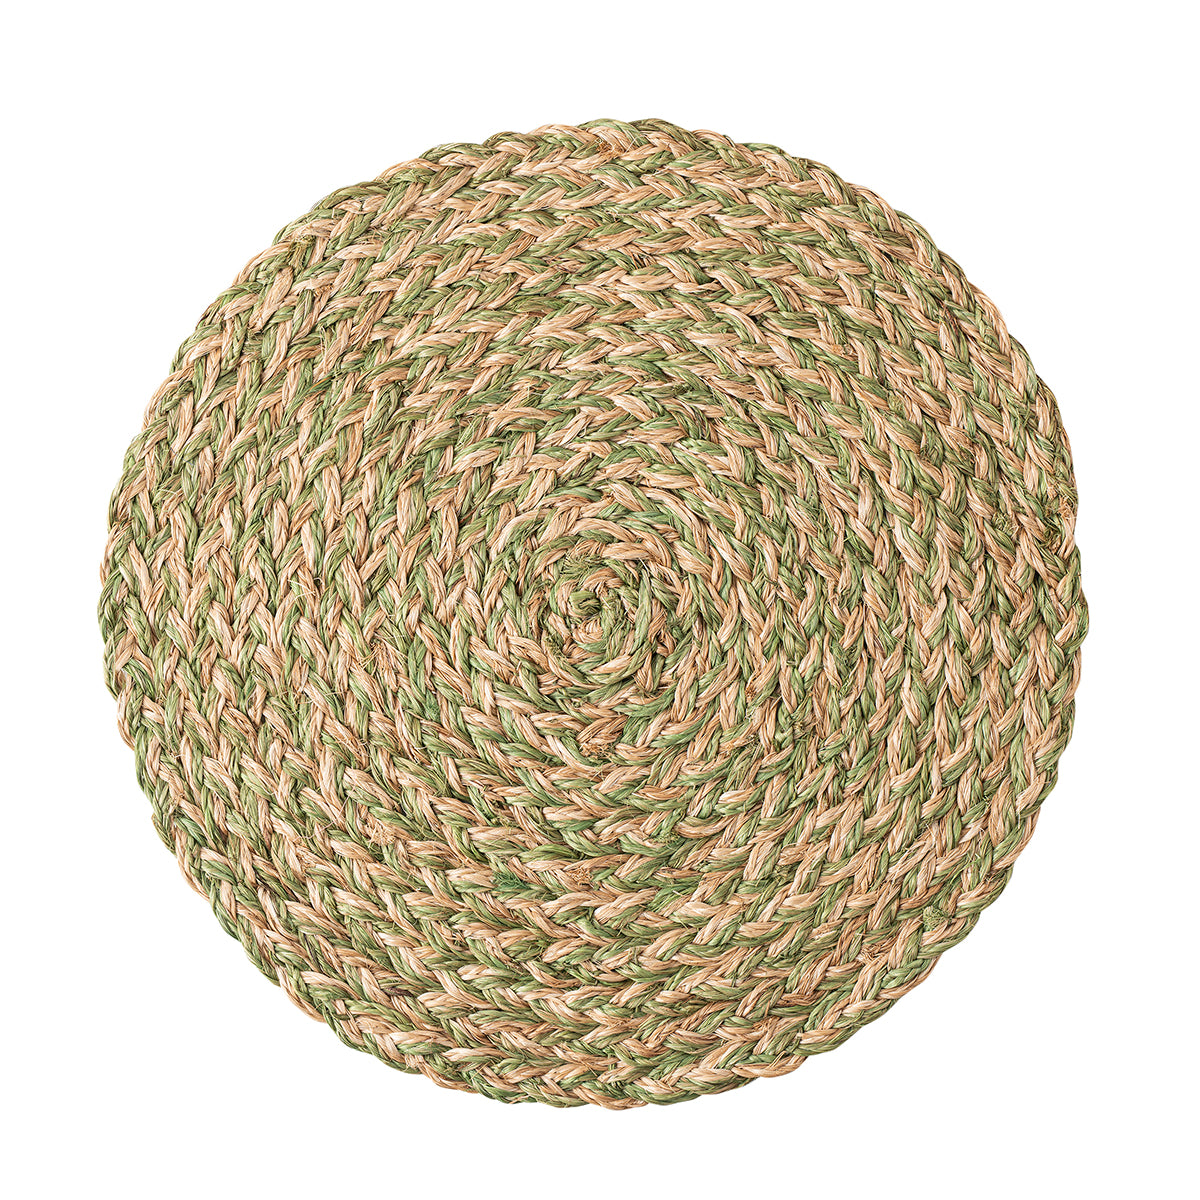 Woven Straw Sage Placemat